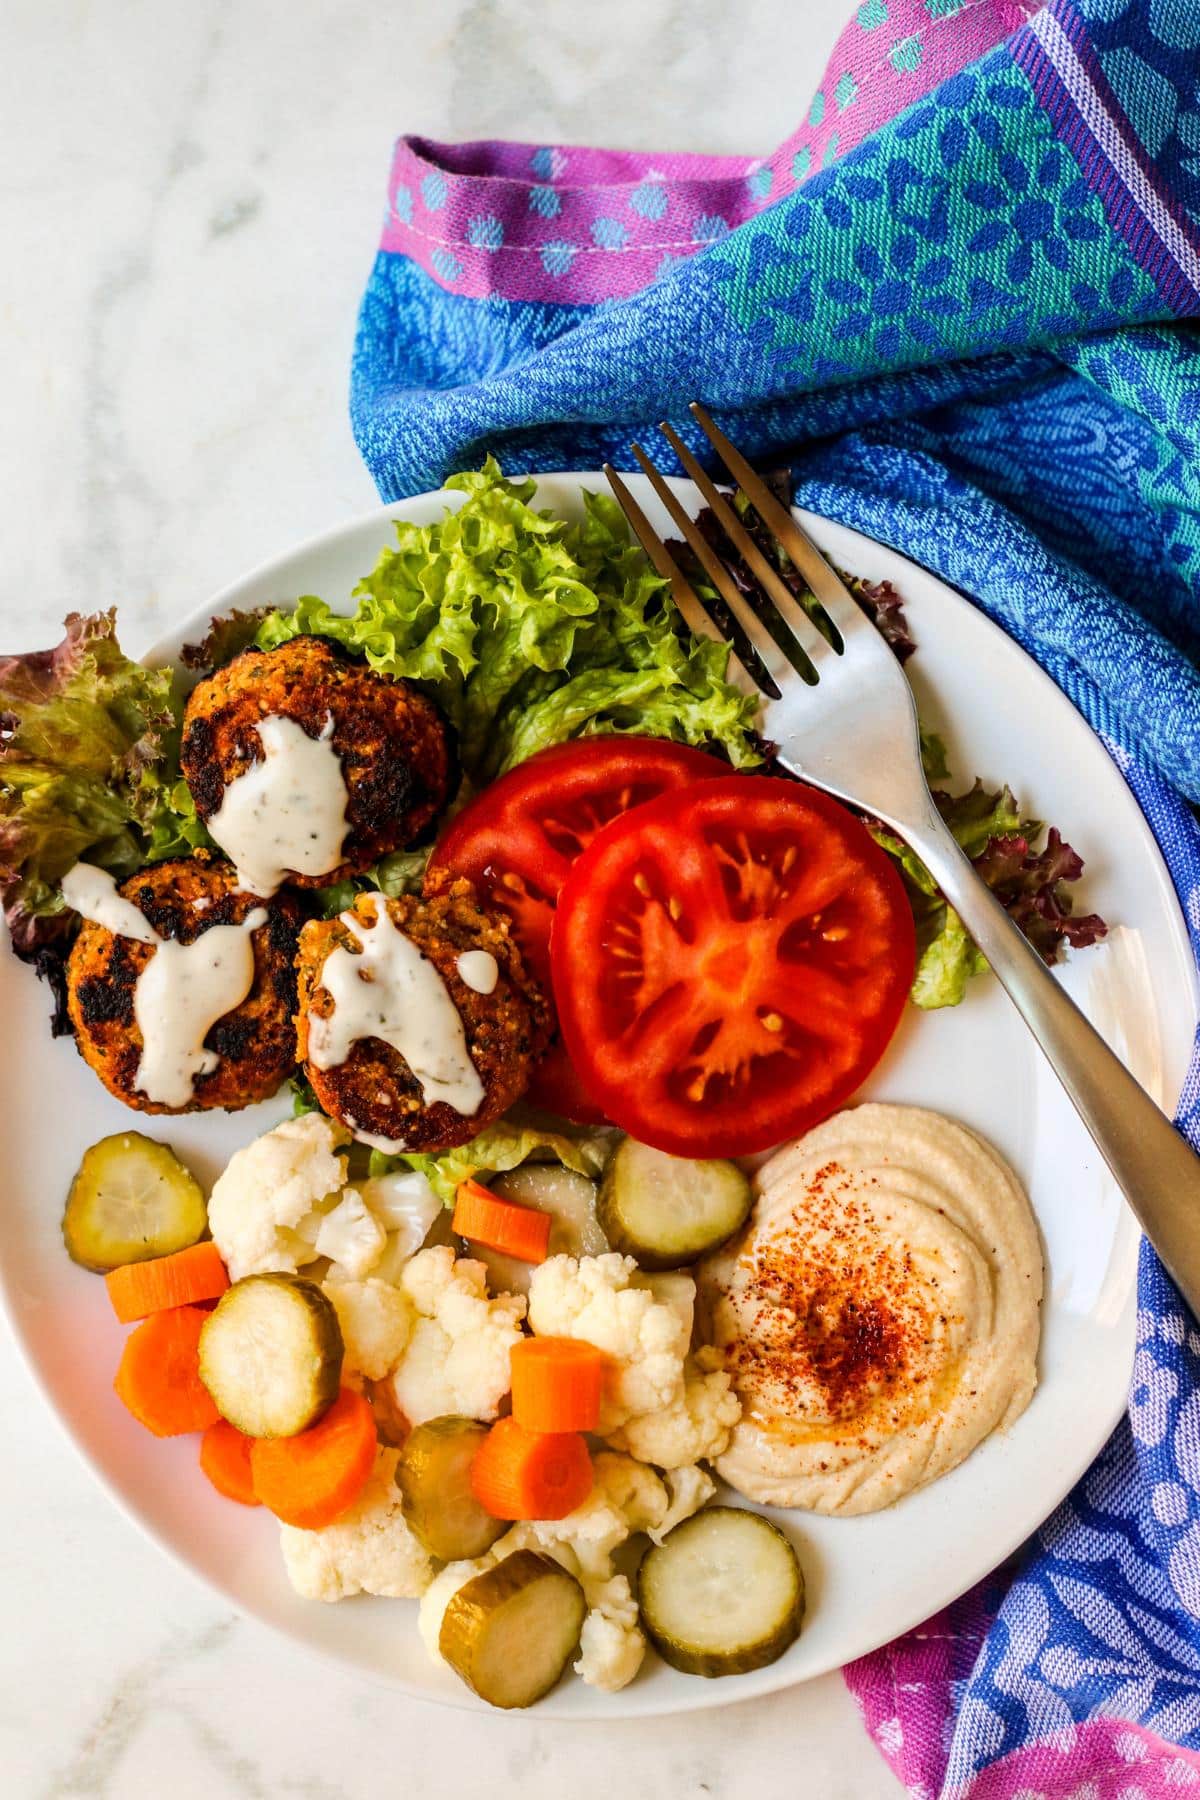 Plate of falafel, lettuce, tomatoes, hummus, and refrigerator pickled vegetables.